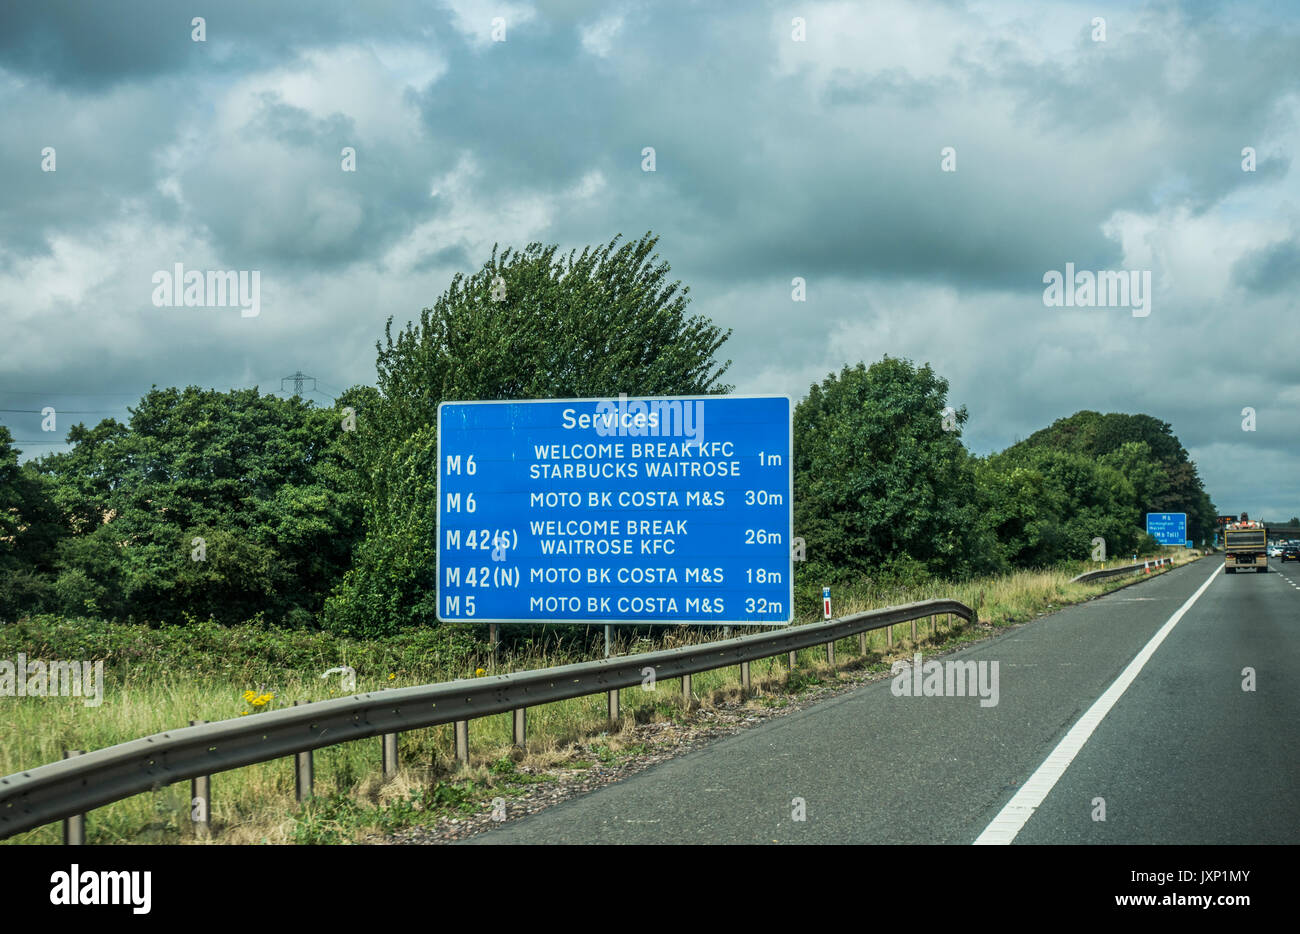 Signpost for services at various places, taken from the M6 motorway near Birmingham, heading west, England, UK. Stock Photo